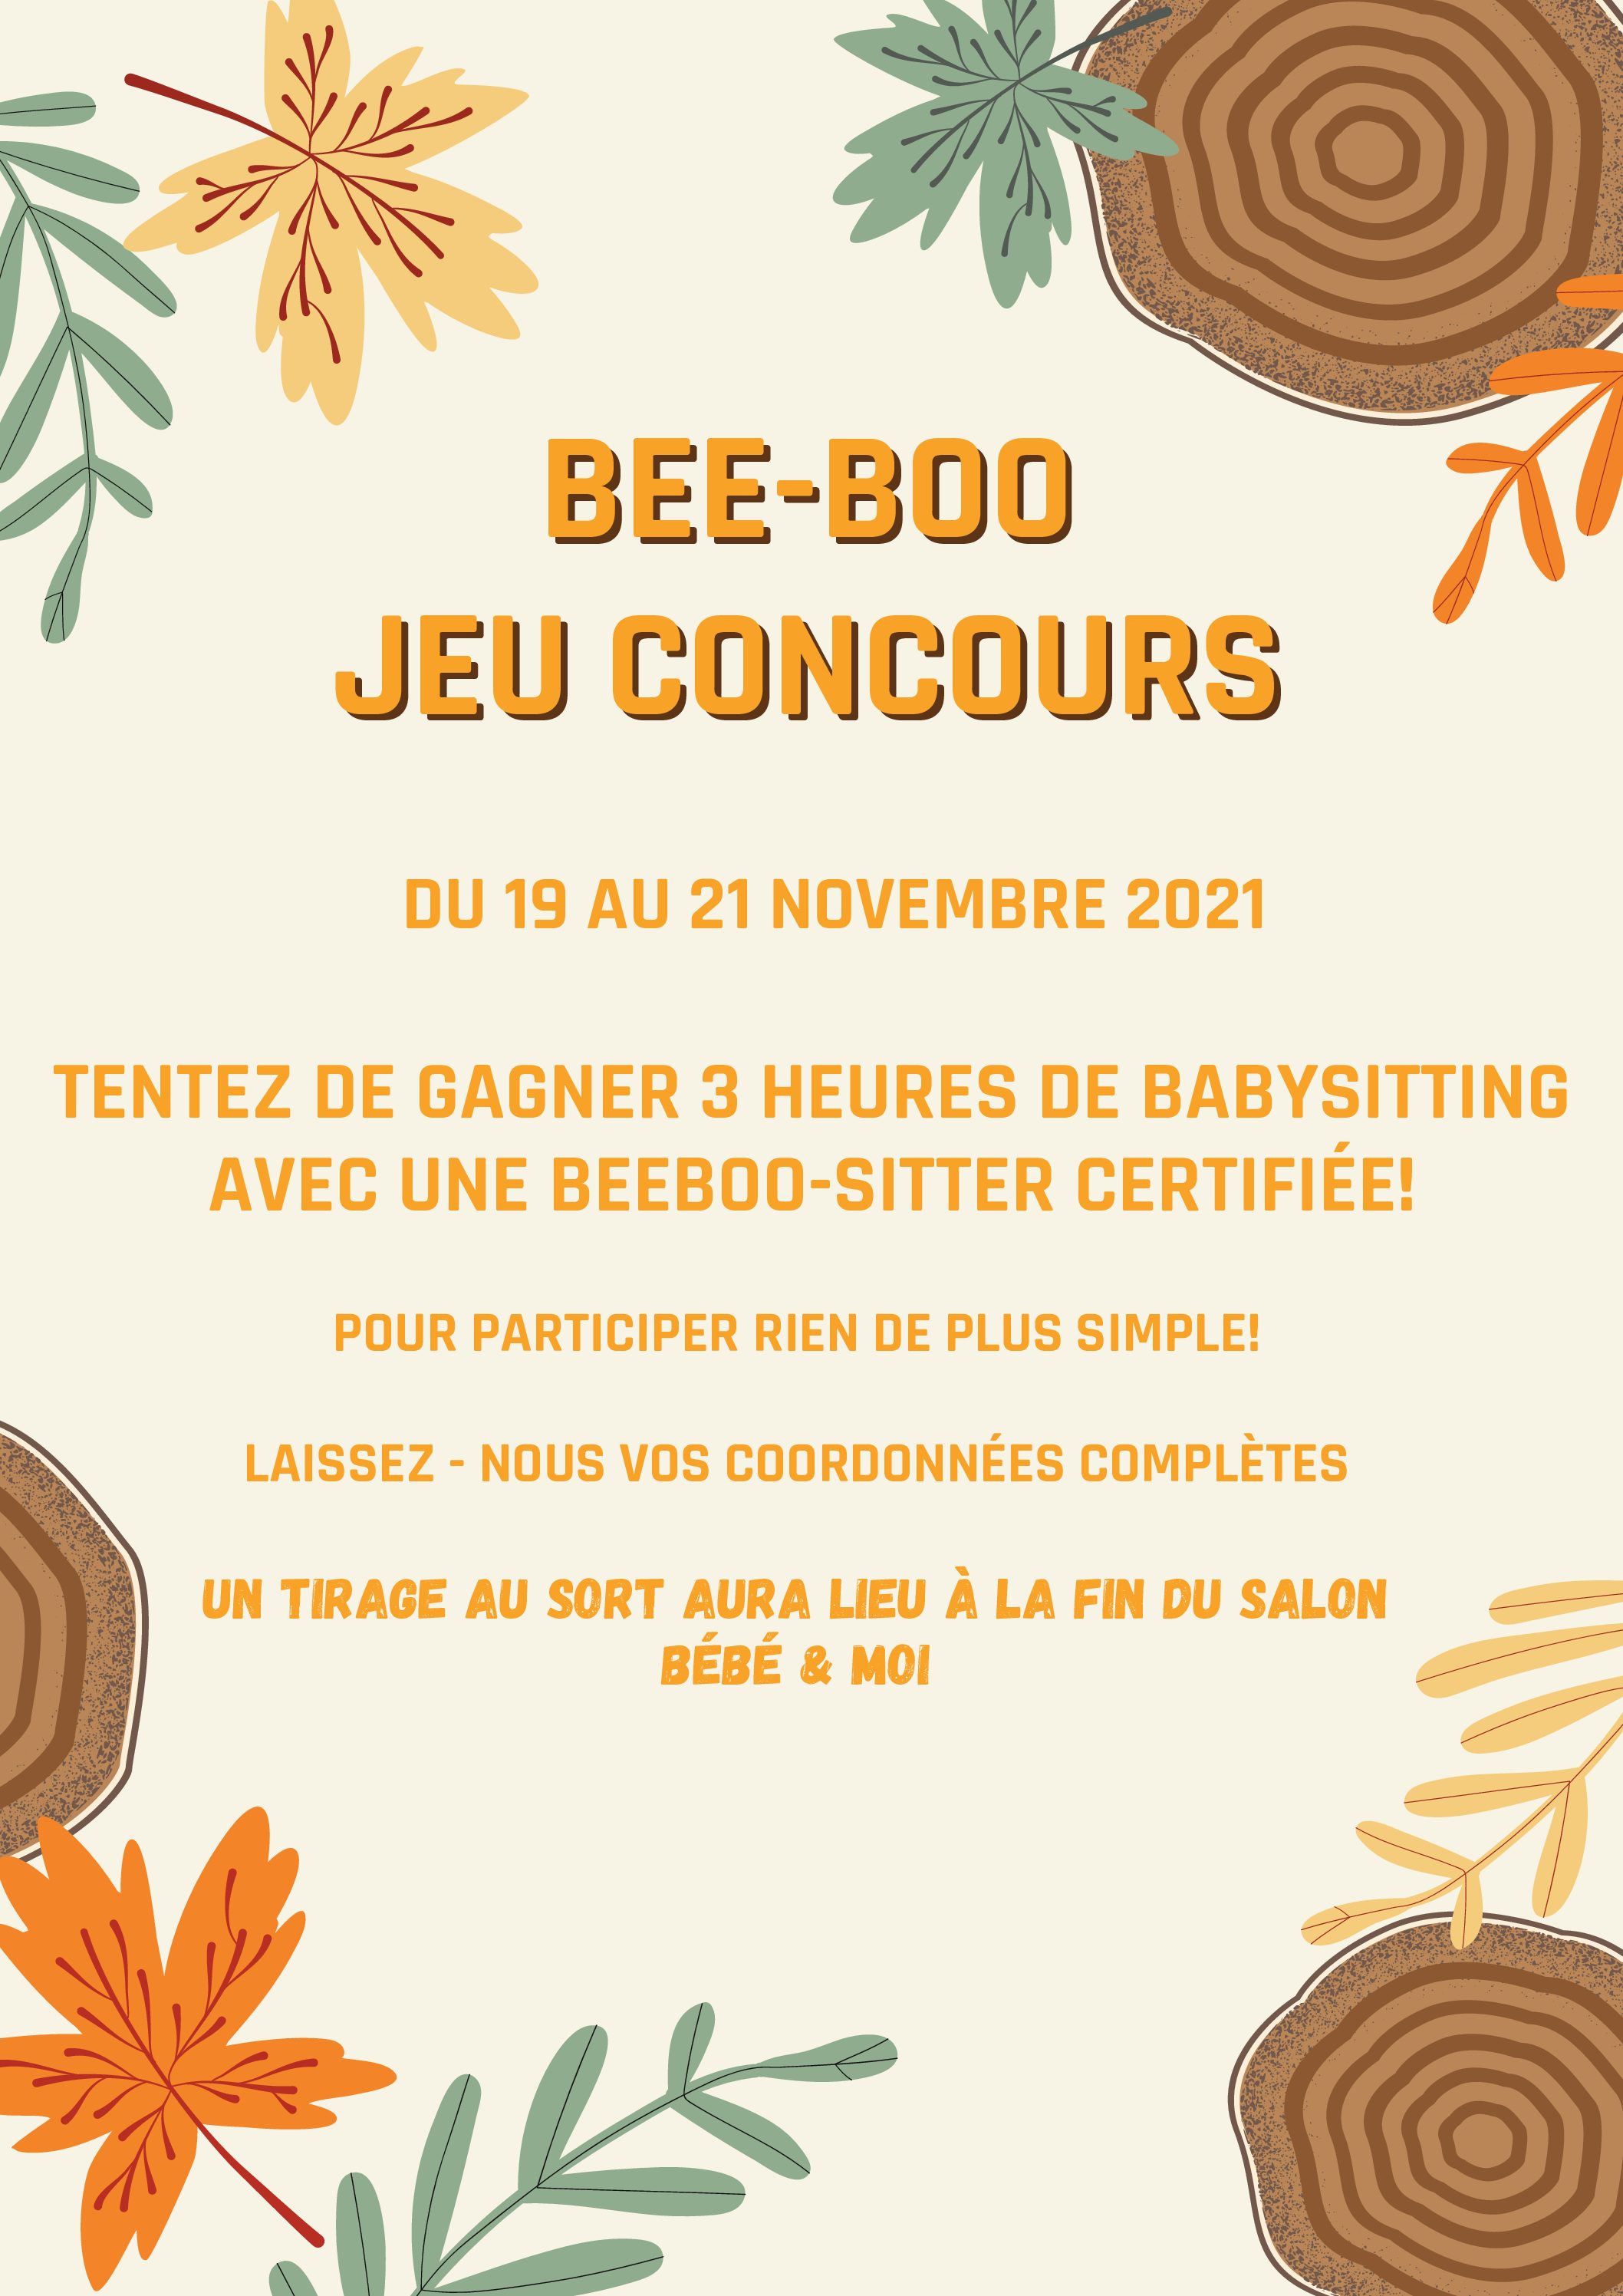 Come and see us this weekend at the Bébé & Moi exhibition at Palexpo